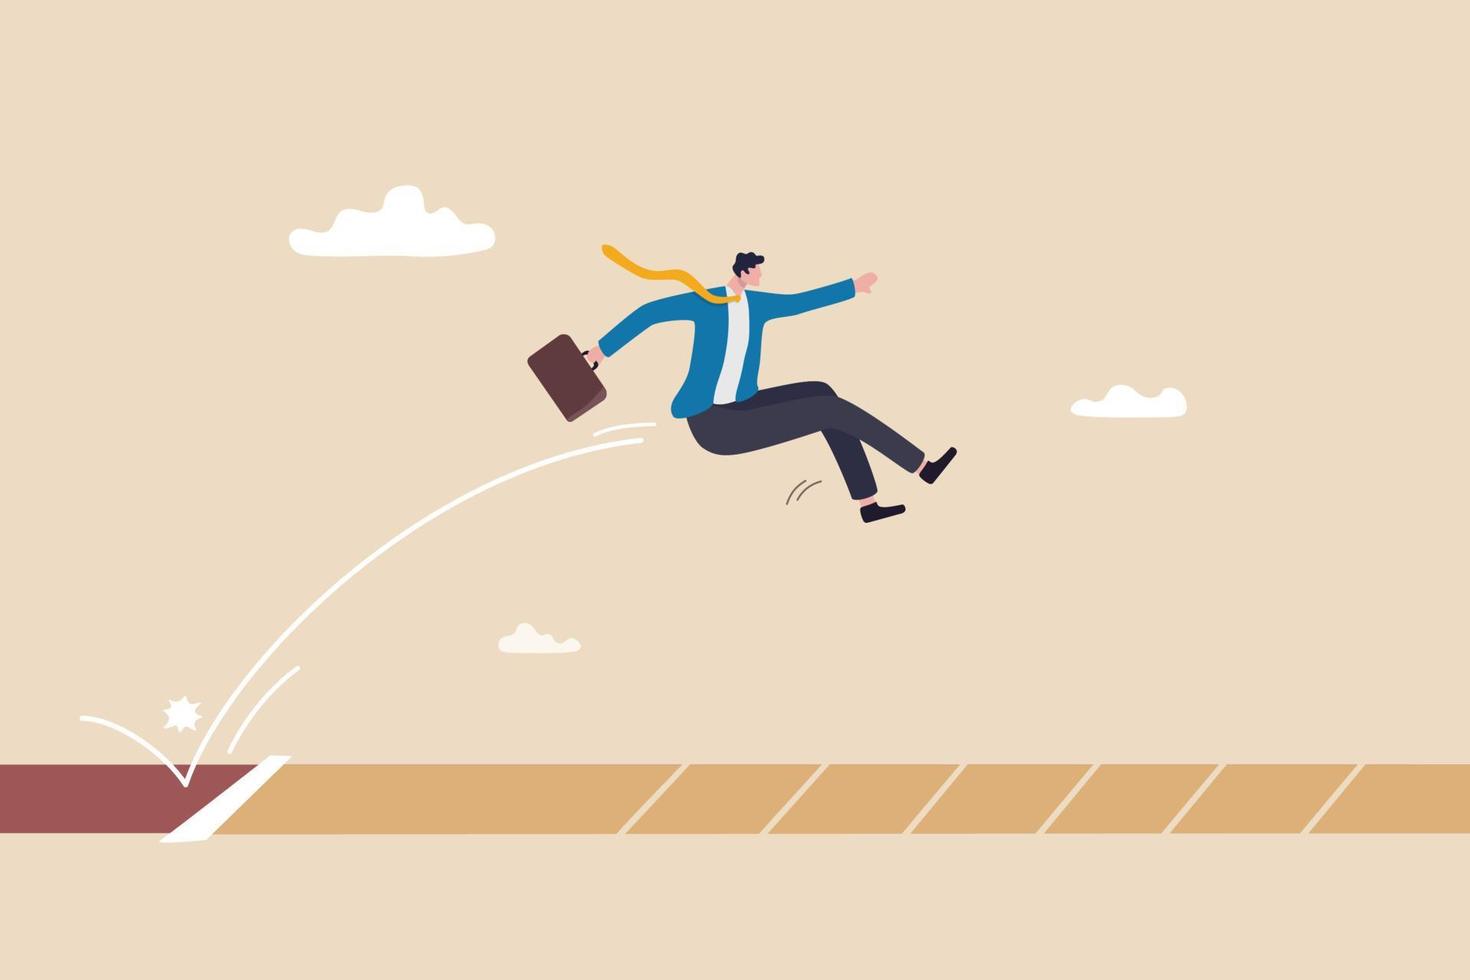 Business challenge, ambition to win competition or better than previous try, effort to achieve target or goal, overcome difficulty concept, businessman with briefcase long jump to winning new record. vector